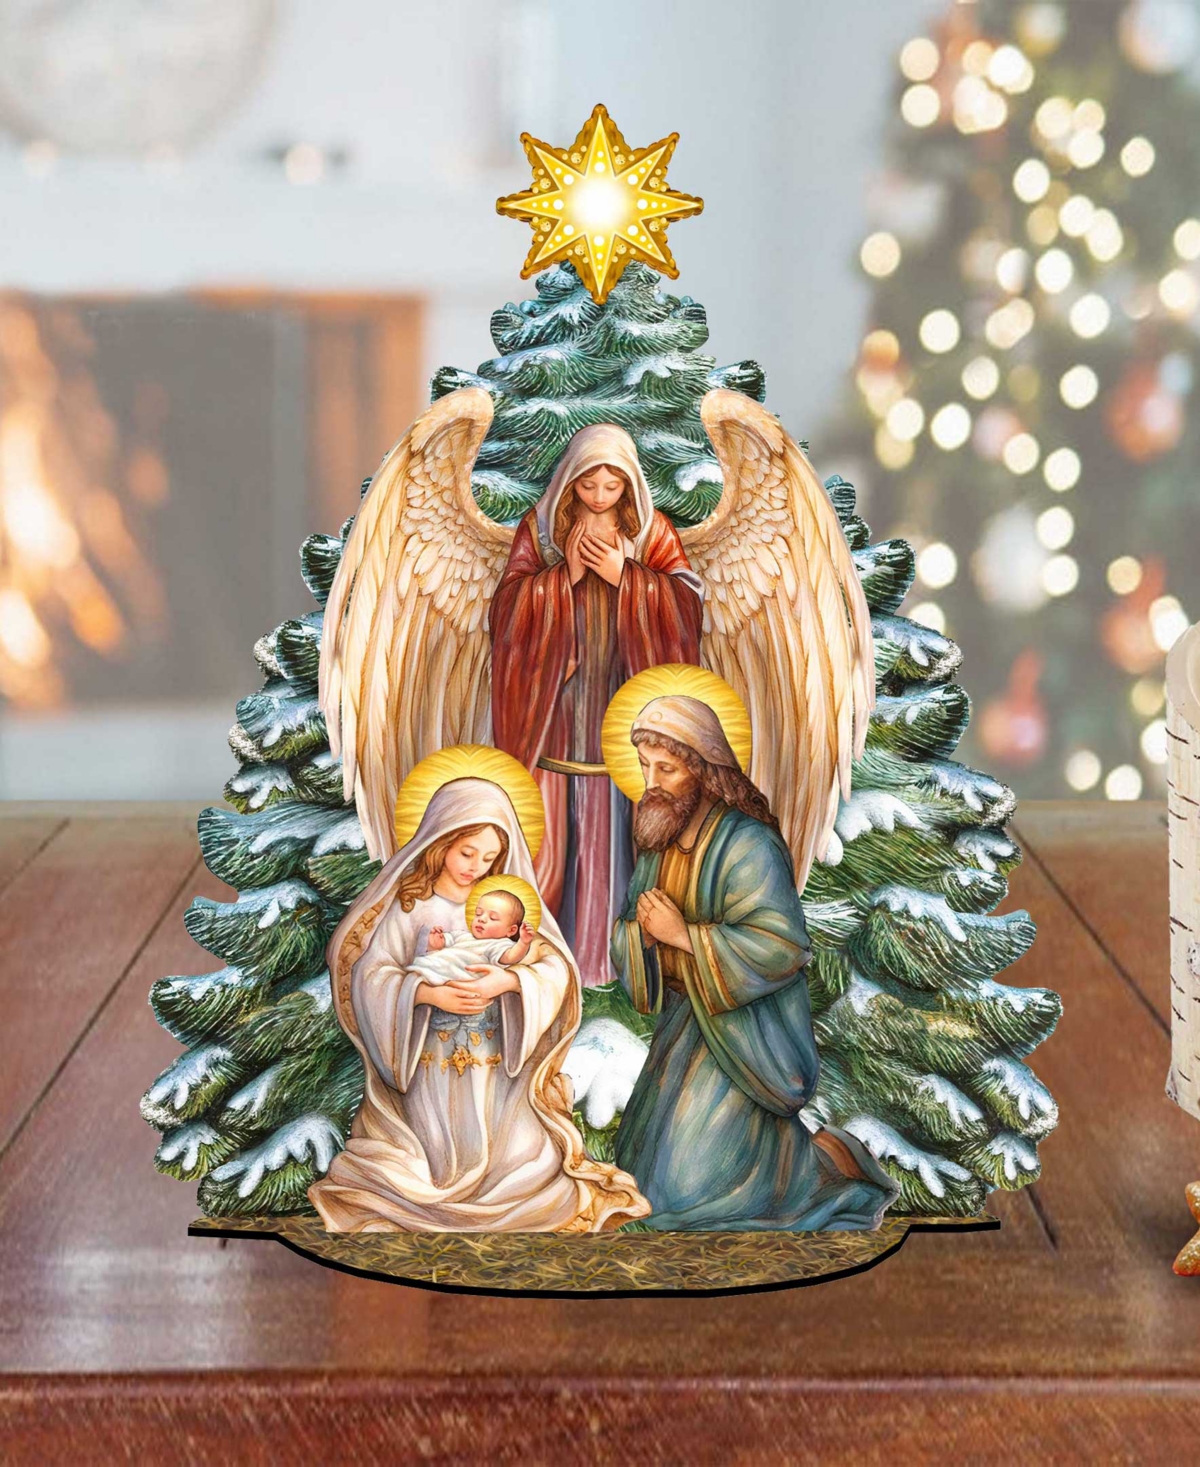 Nativity Scene with Christmas Tree Holiday Village 12" Table Decoration G.DeBrekht - Multi Color